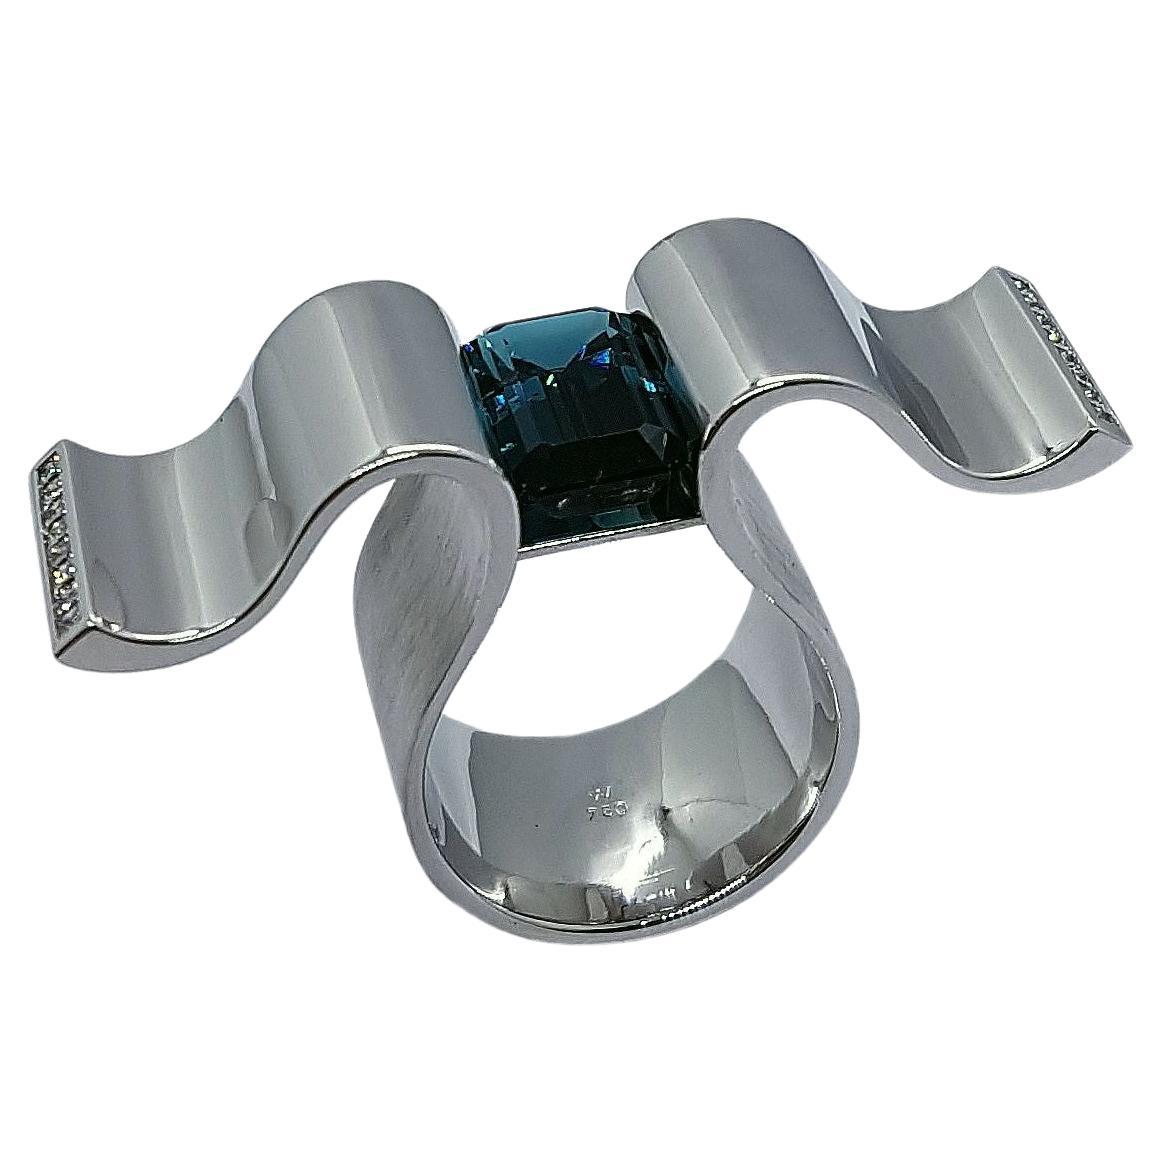 Emerald Cut 6.13 Carat Indicolite Diamond White Gold Ring “Wave” Wagner Collection For Sale